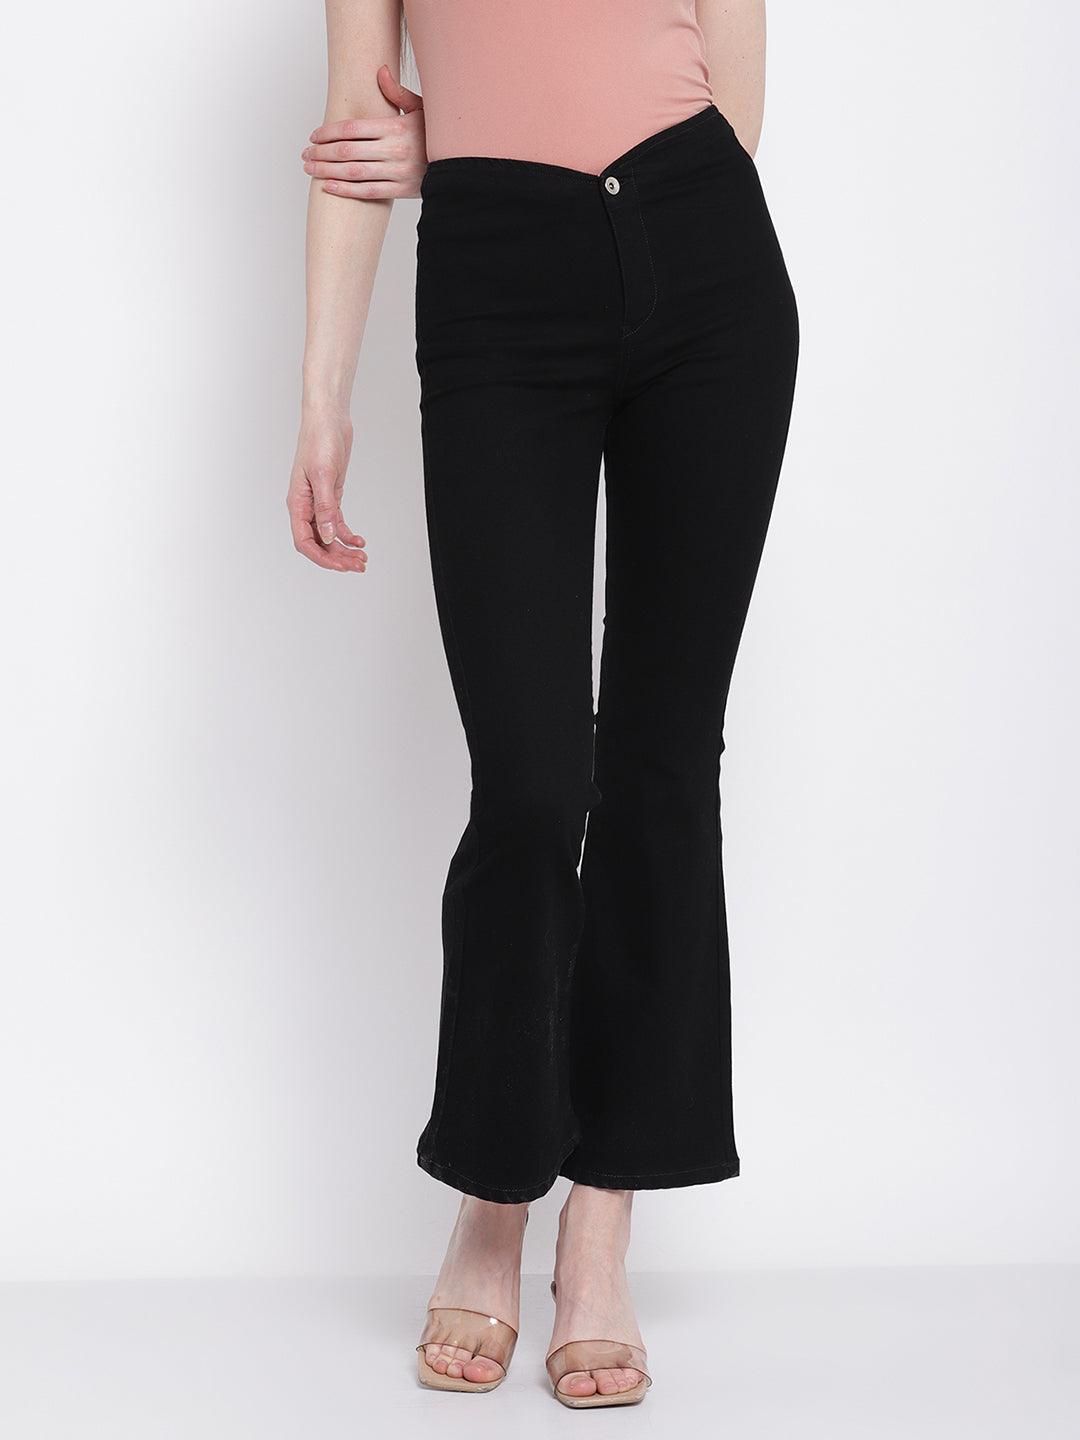 Women Bell Bottom Fit Cropped Length Jeans